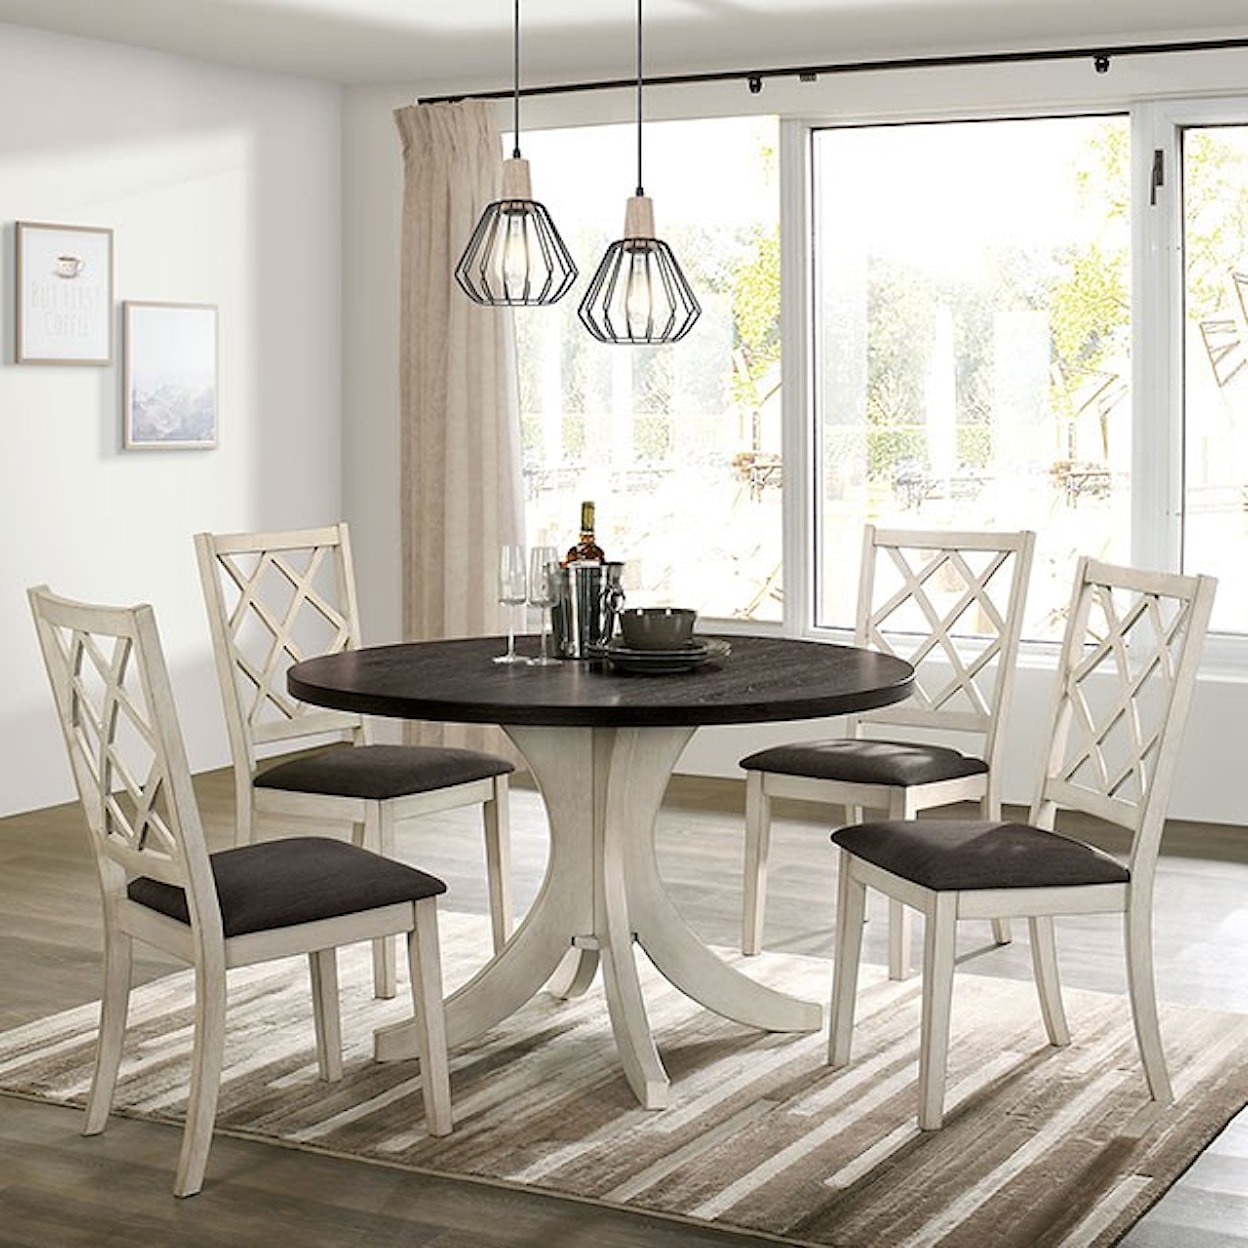 Furniture of America Haleigh 5-Piece Dining Set